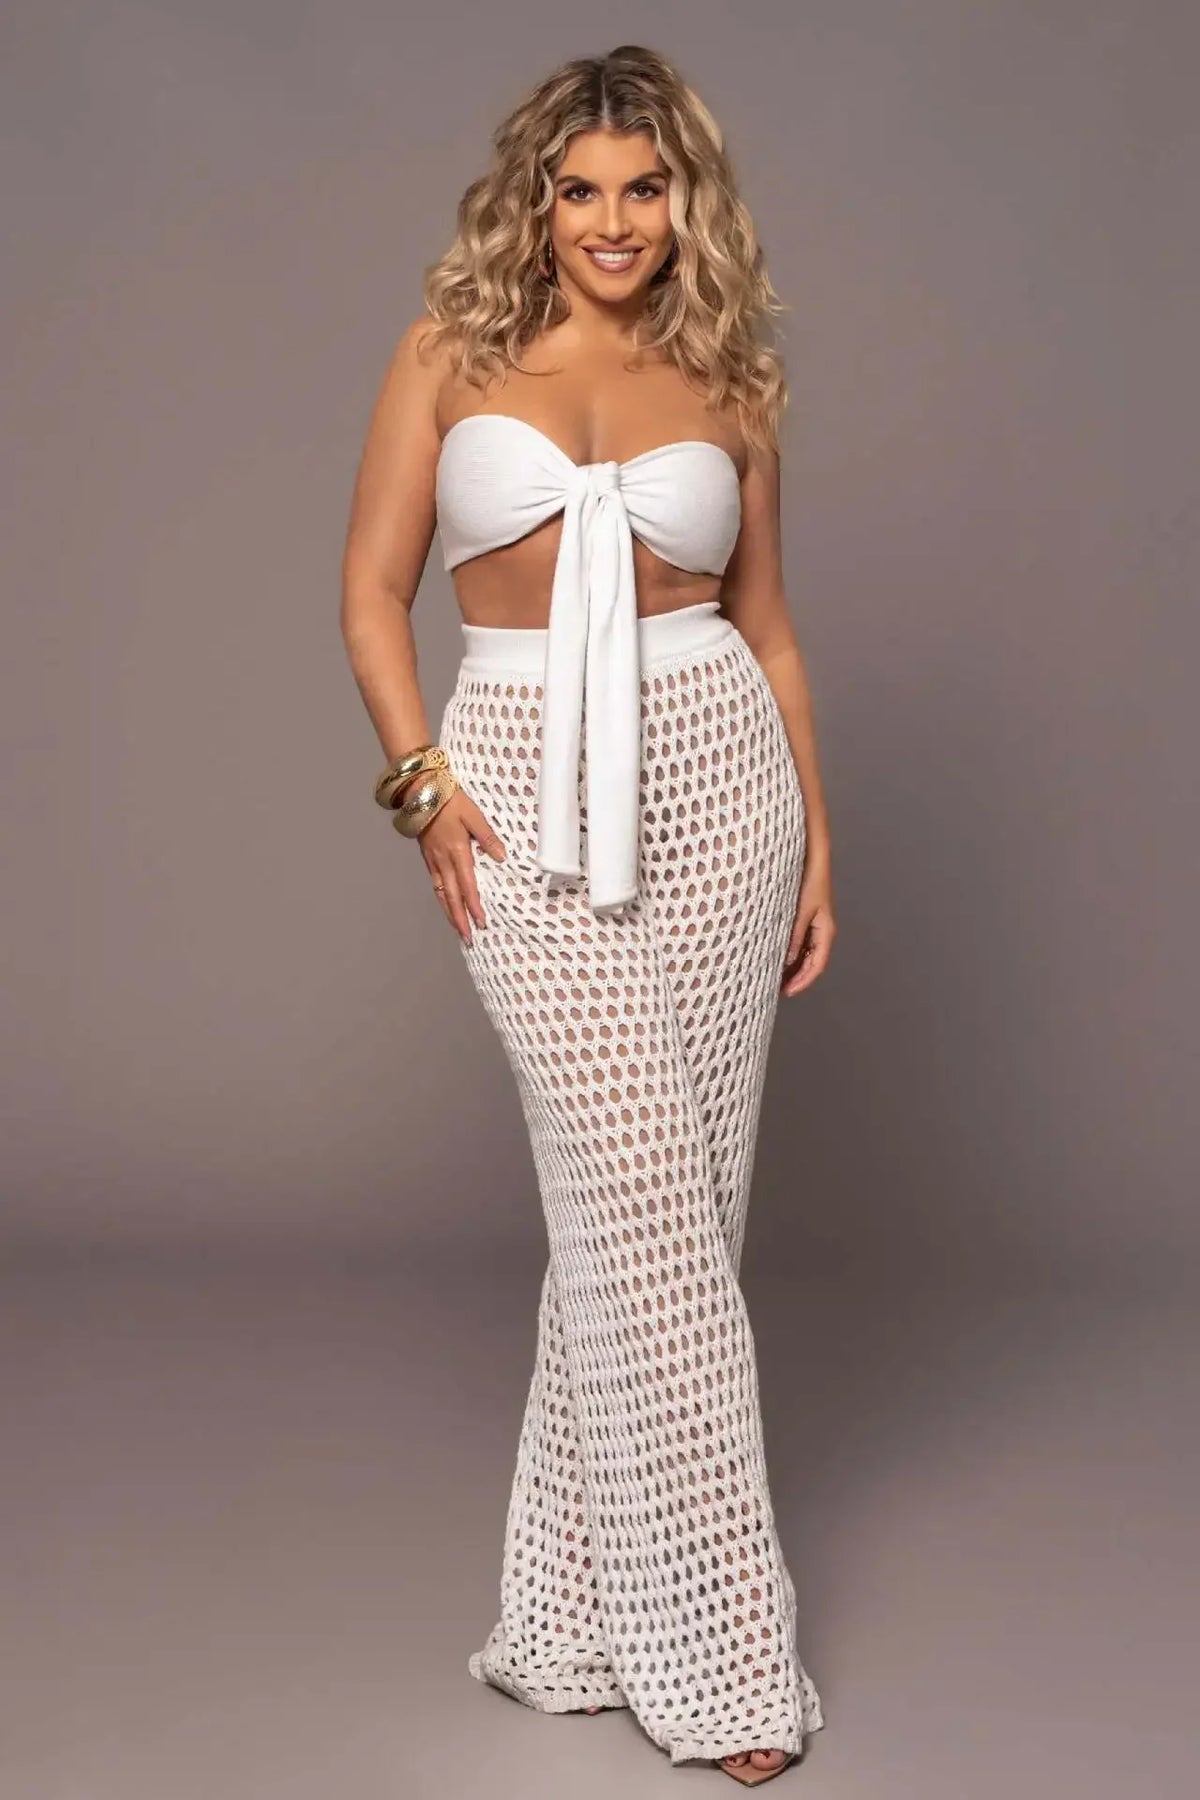 SORTYGO - Sultry Knit Pants Set in White sets